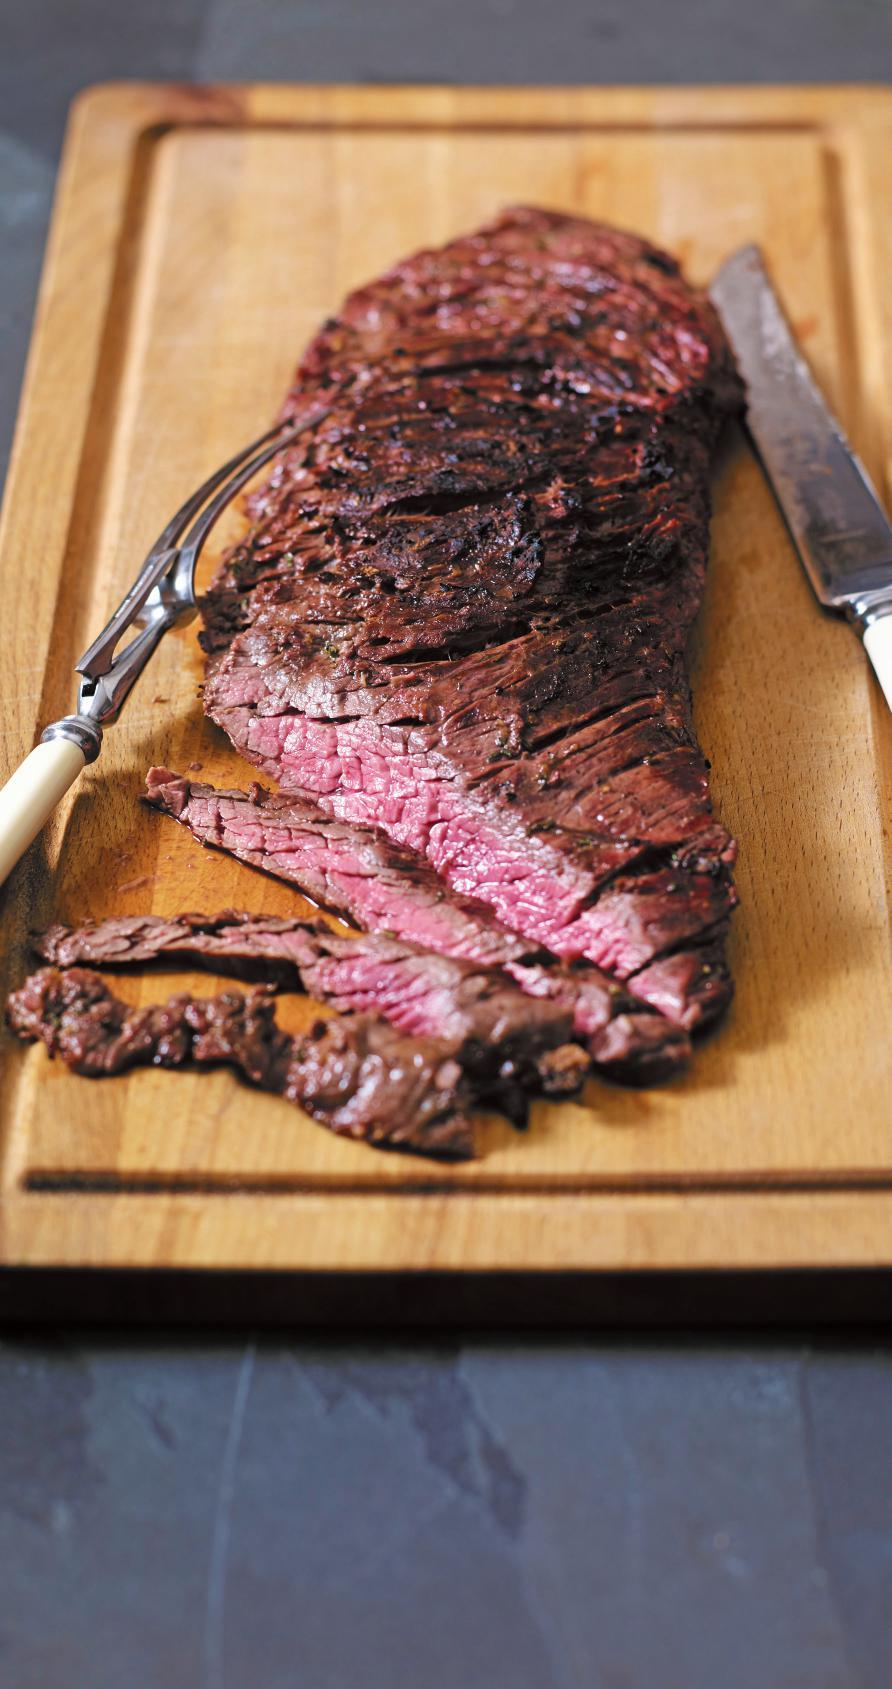 The Bavette is part of the